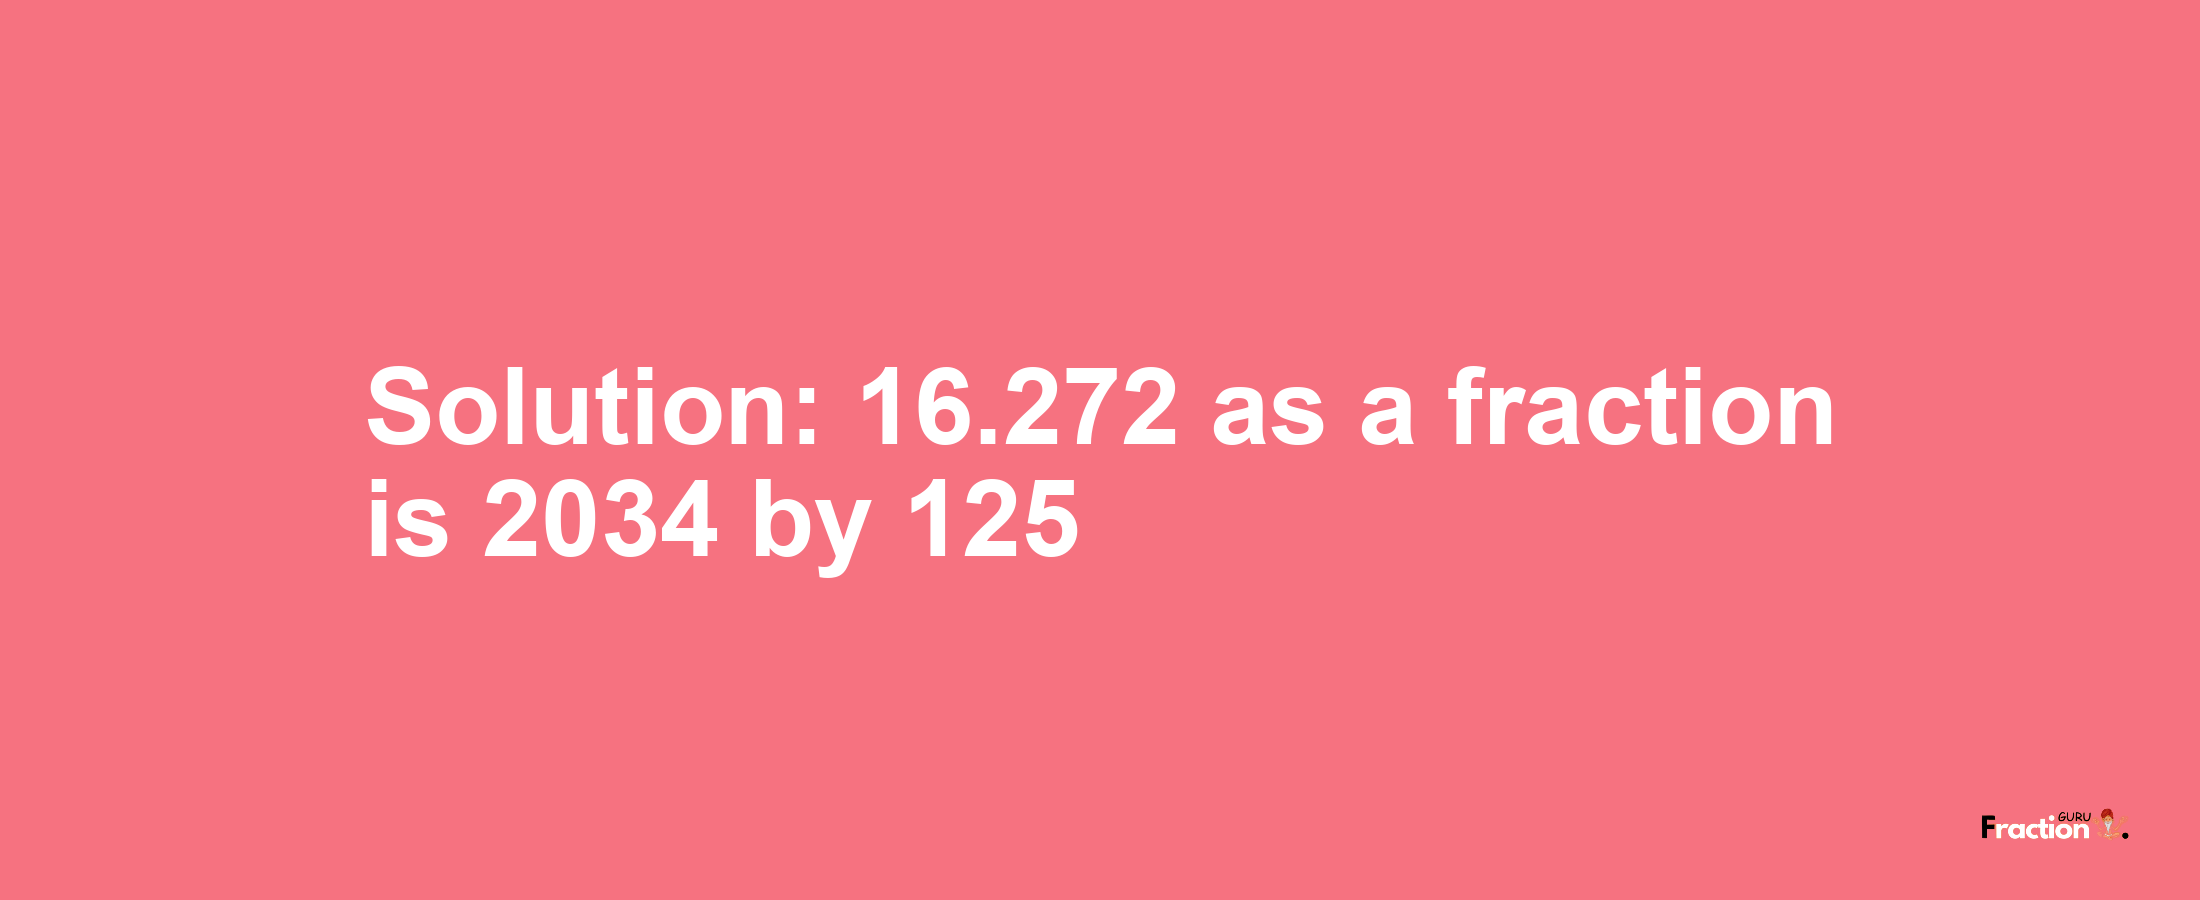 Solution:16.272 as a fraction is 2034/125